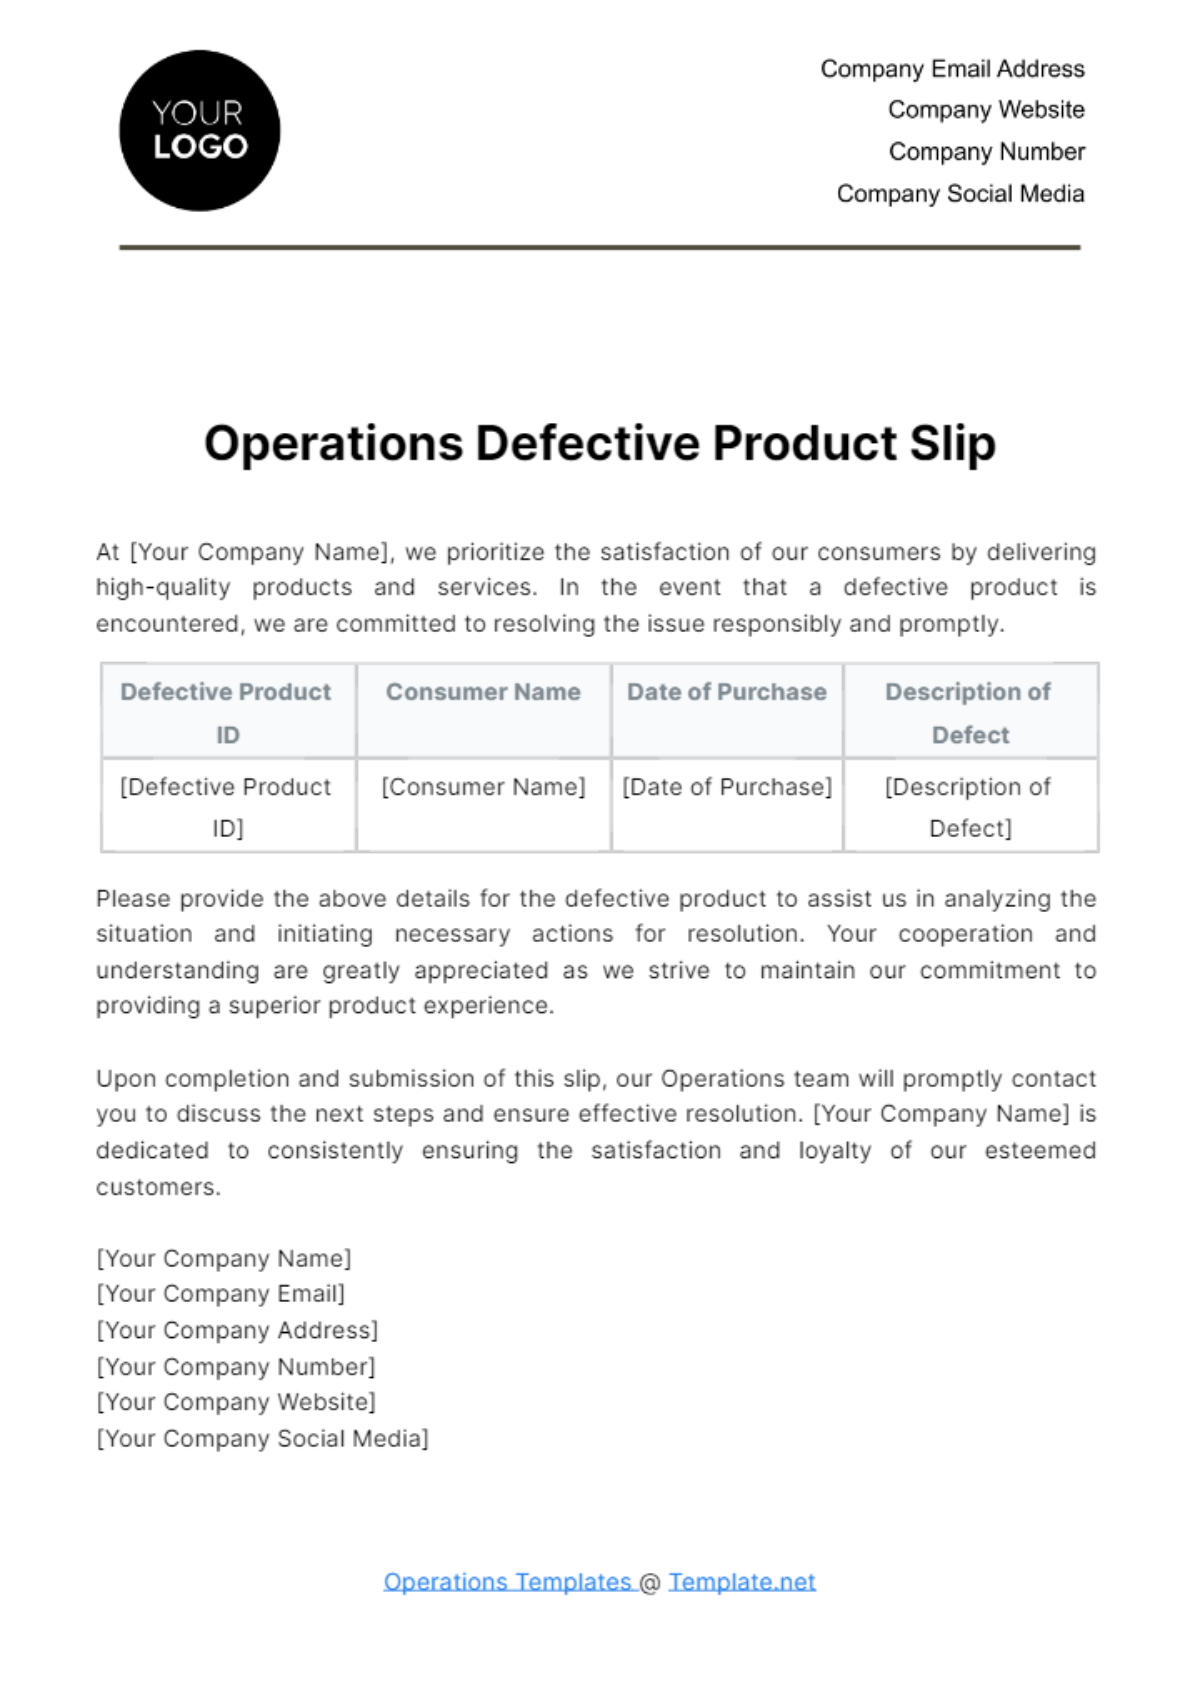 Operations Defective Product Slip Template